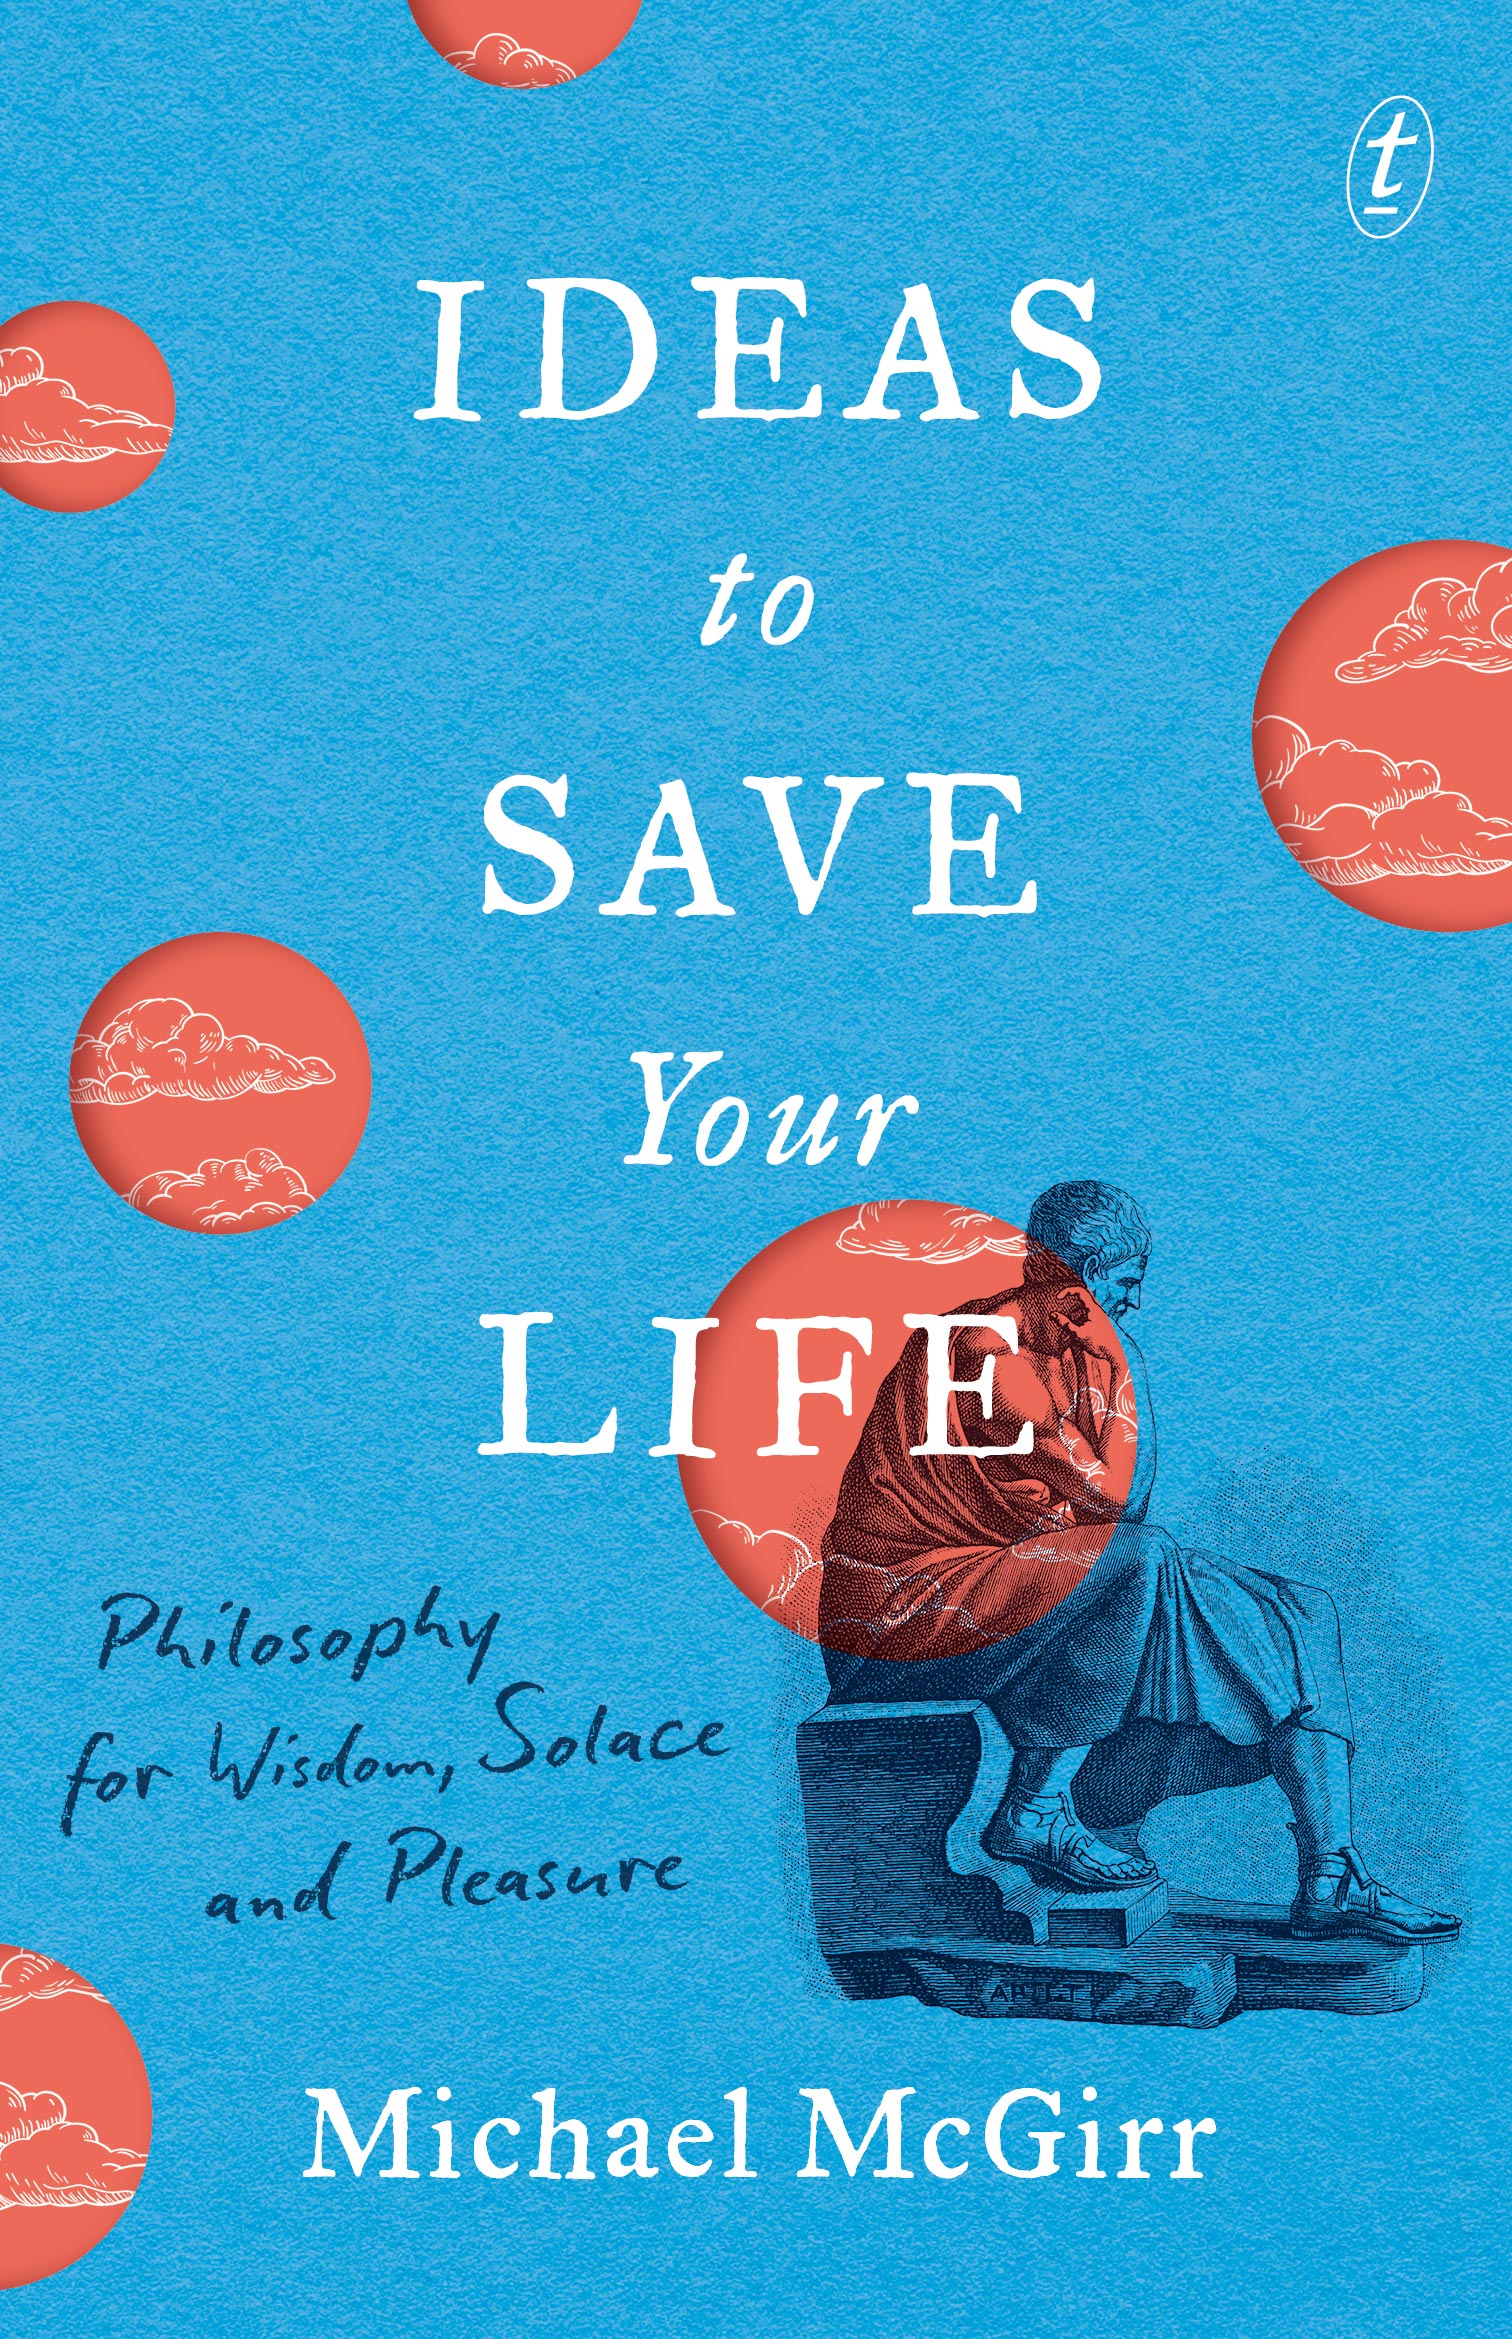 Front cover of Ideas to save your life by Michael McGirr